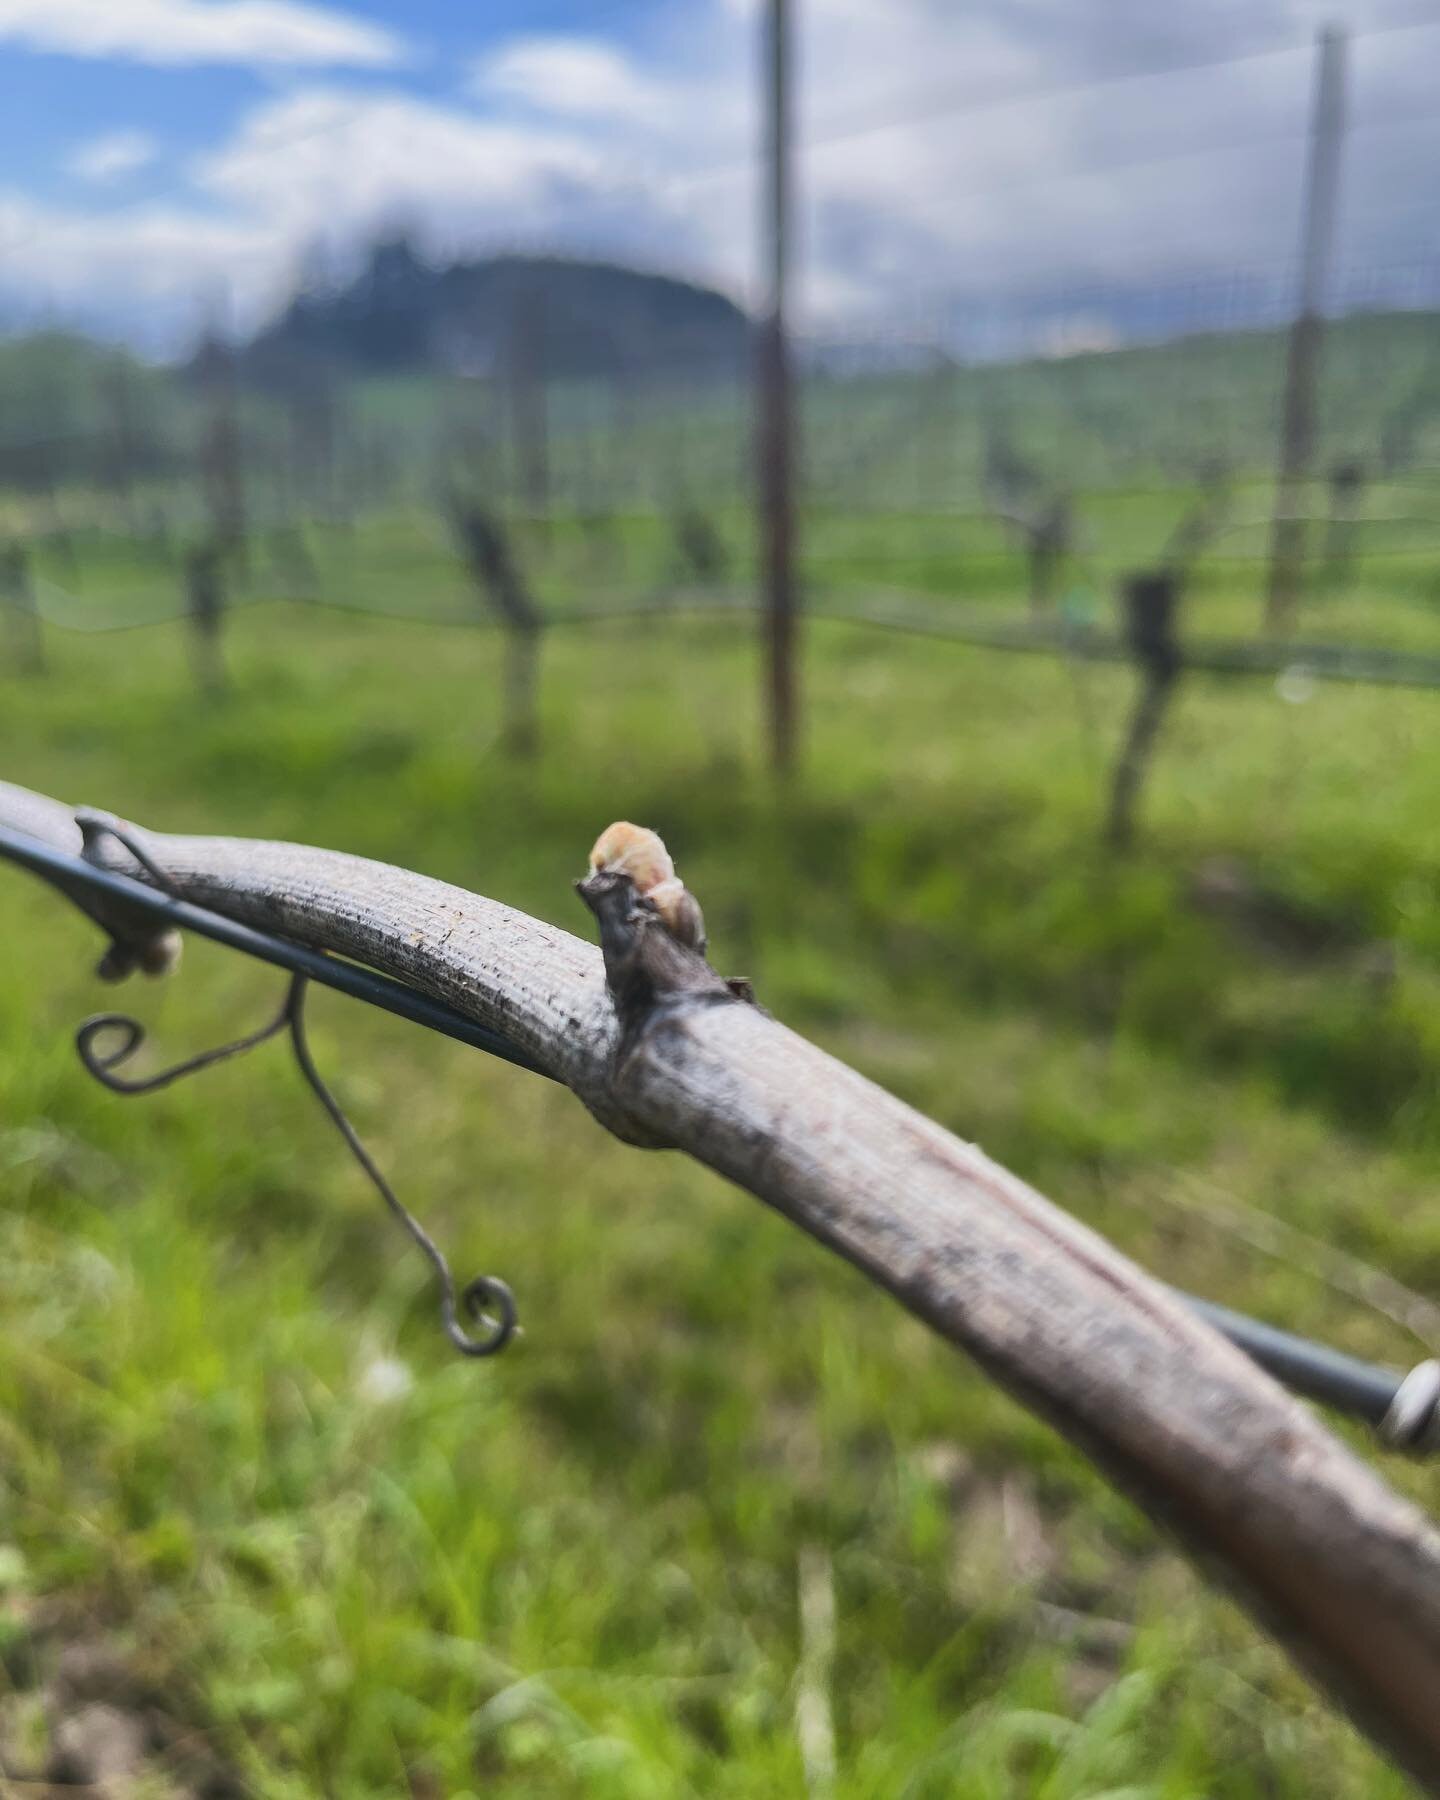 Obligatory Bud Break photos! 

More than anything else, the appearance of these little buds on the vines are our first indicator that Spring is Sprung and our growing season is beginning. 

Come see for yourself at the Vineyard this weekend by bookin